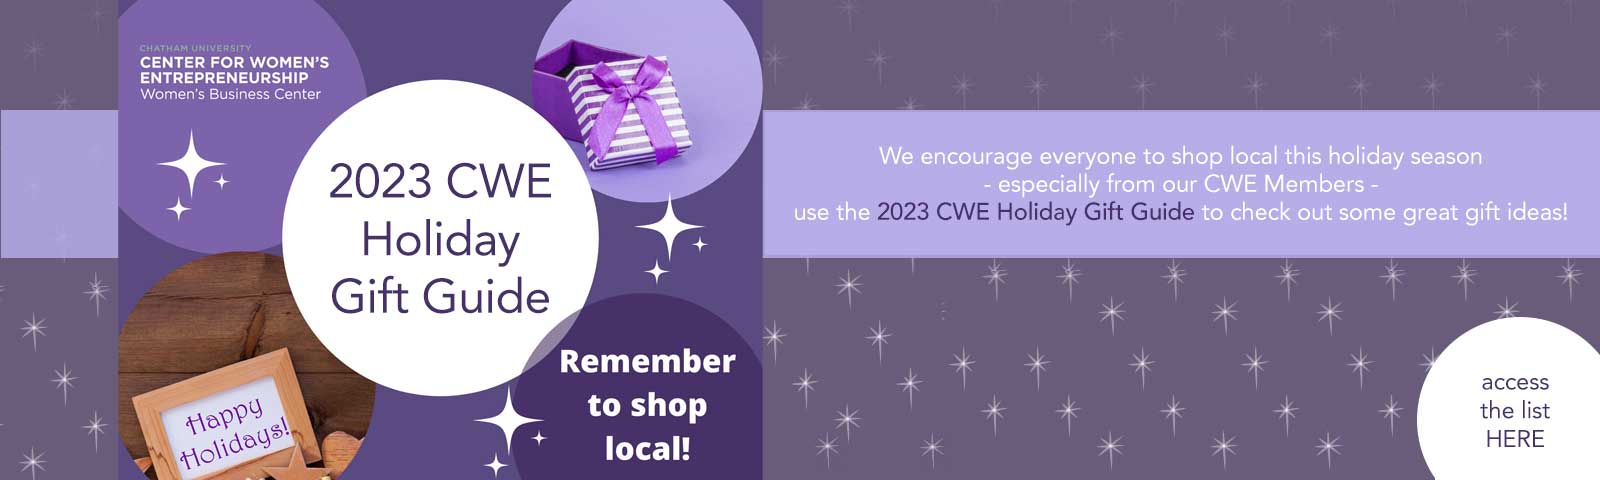 We encourage everyone to Shop Local this holiday season - especially from our CWE members - use the 2023 CWE Holiday Gift Guide to checkout some great gift ideas! Access the list HERE